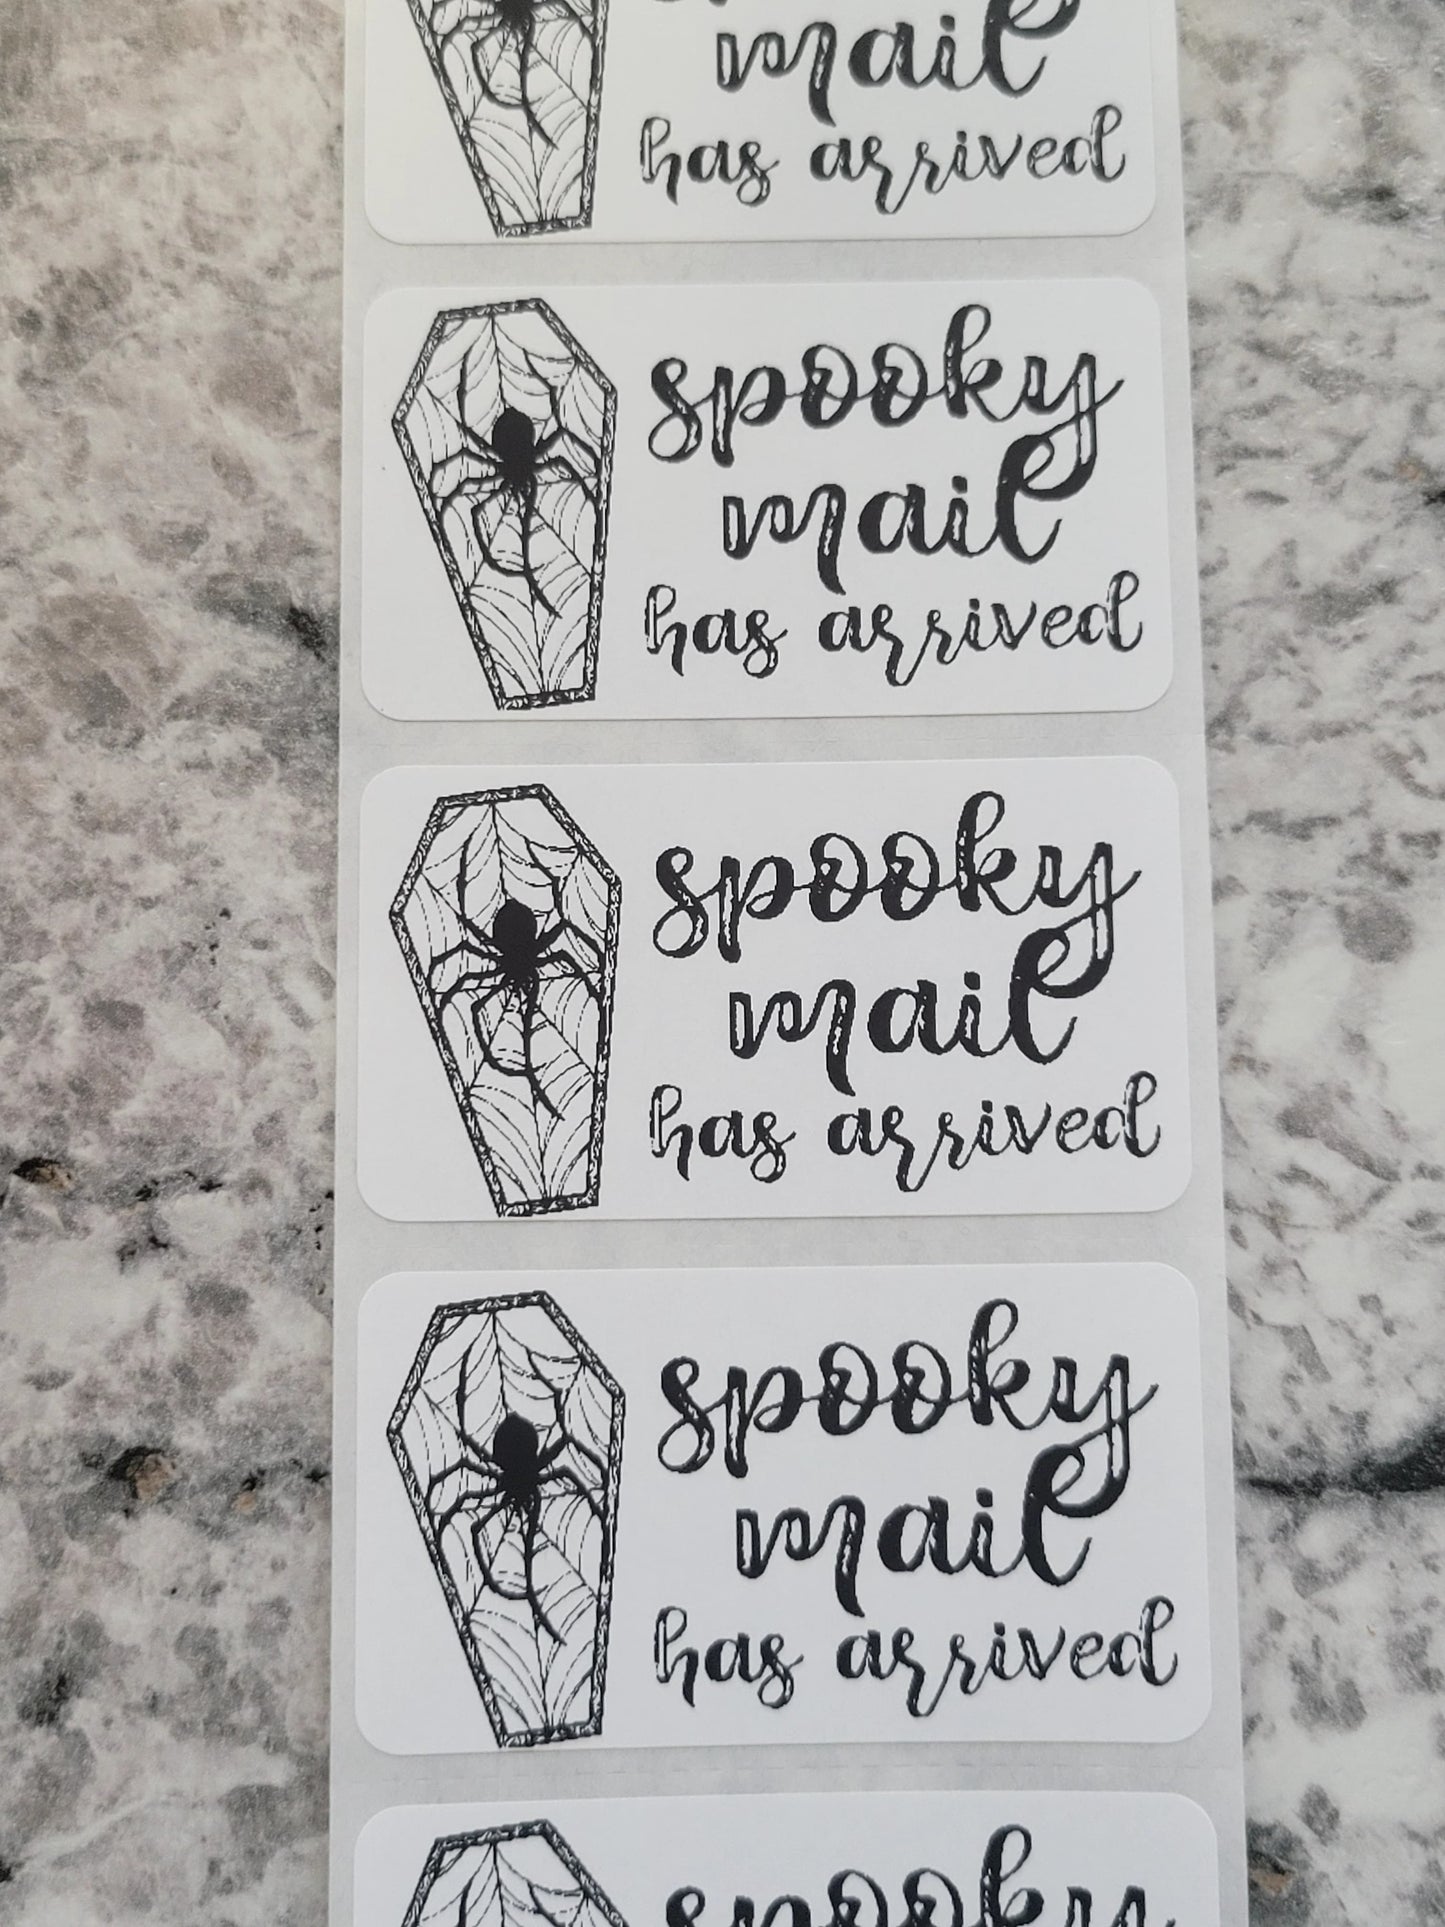 Spooky mail has arrived spider coffin Halloween 50 OR 100 count